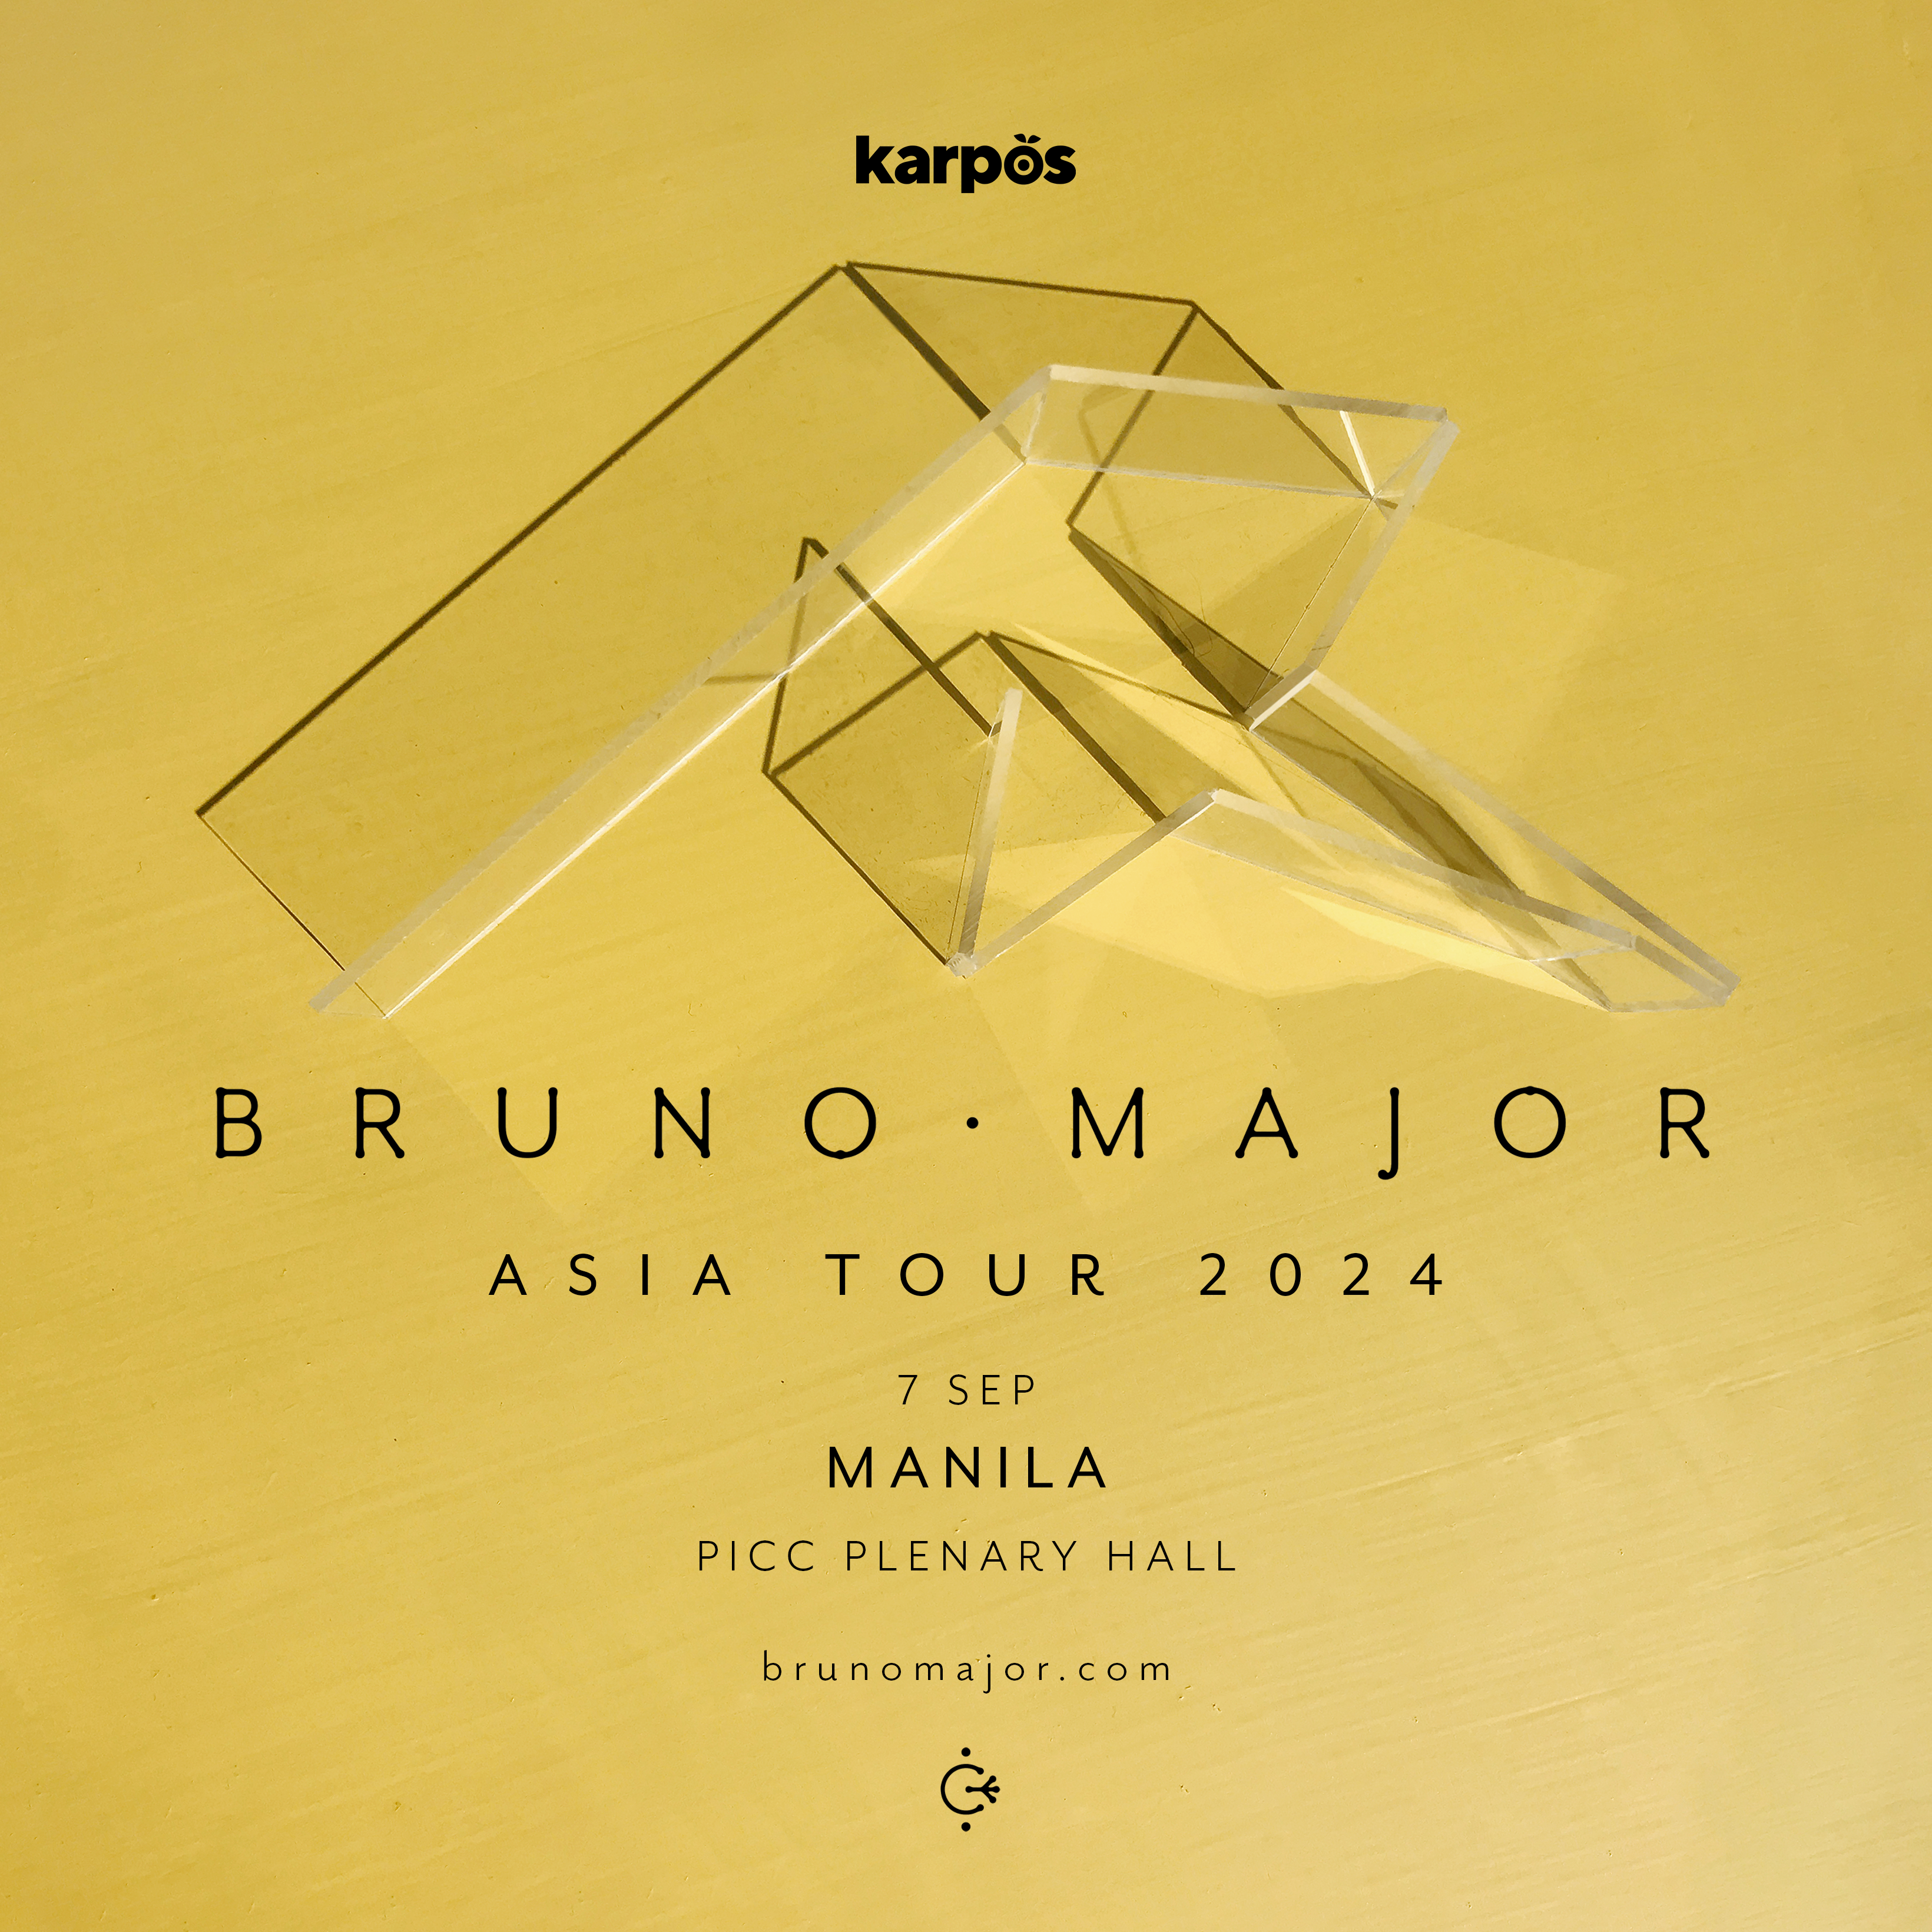 Karpos Is Bringing Bruno Major Back to the Philippines This September